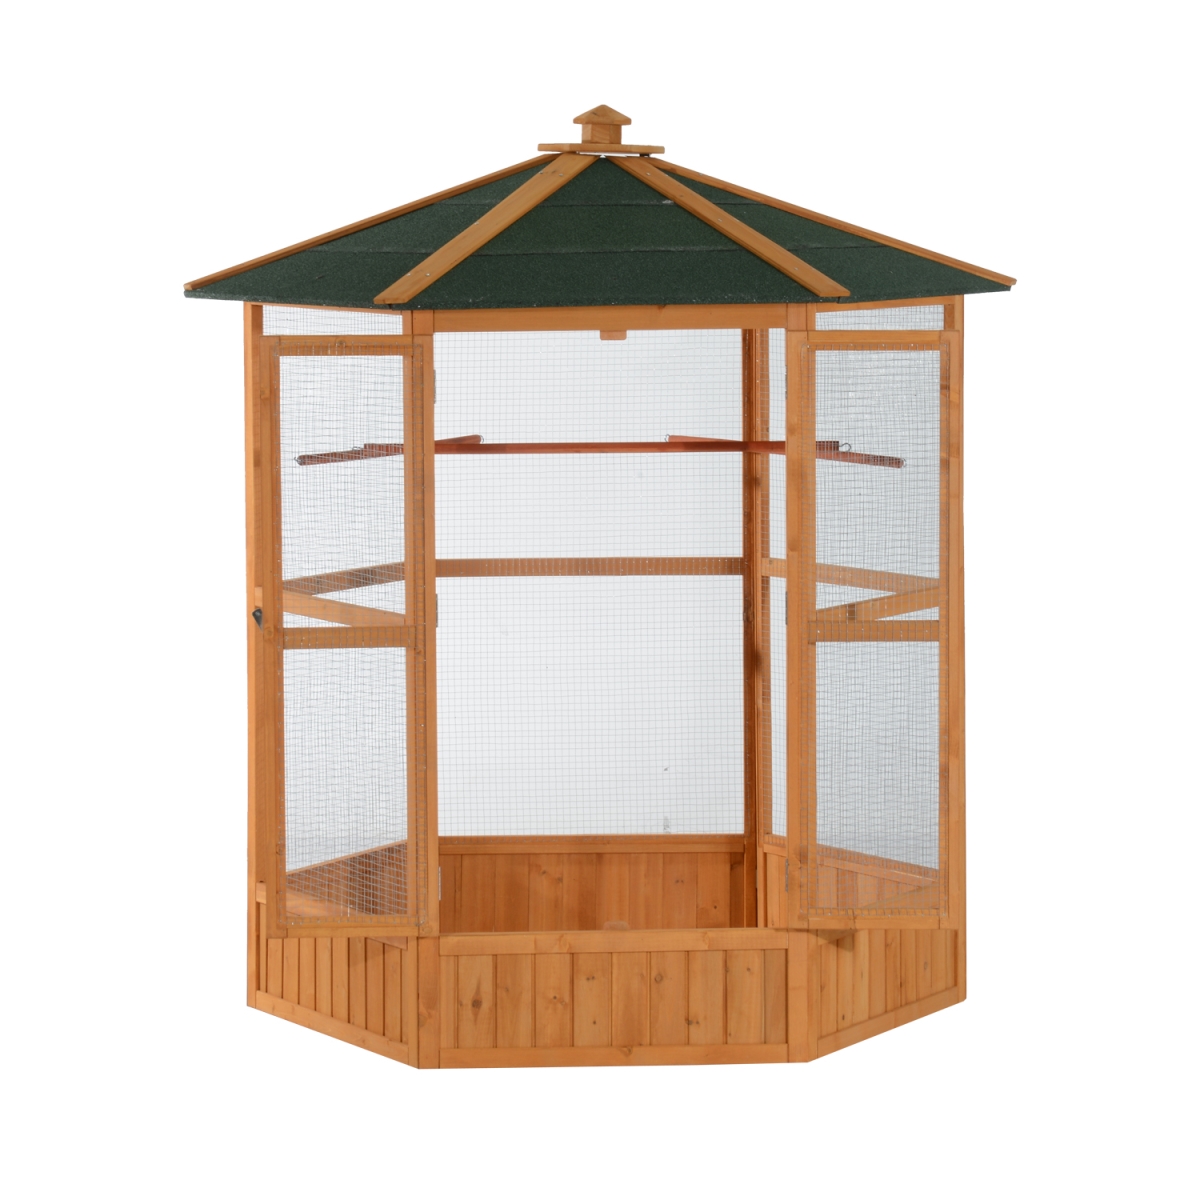 Picture of 212 Main D10-034-1 65 in. PawHut Large Wooden Hexagonal Outdoor Aviary Flight Bird Cage with Covered Roof 2 Extra-Large Doors & Roomy Design